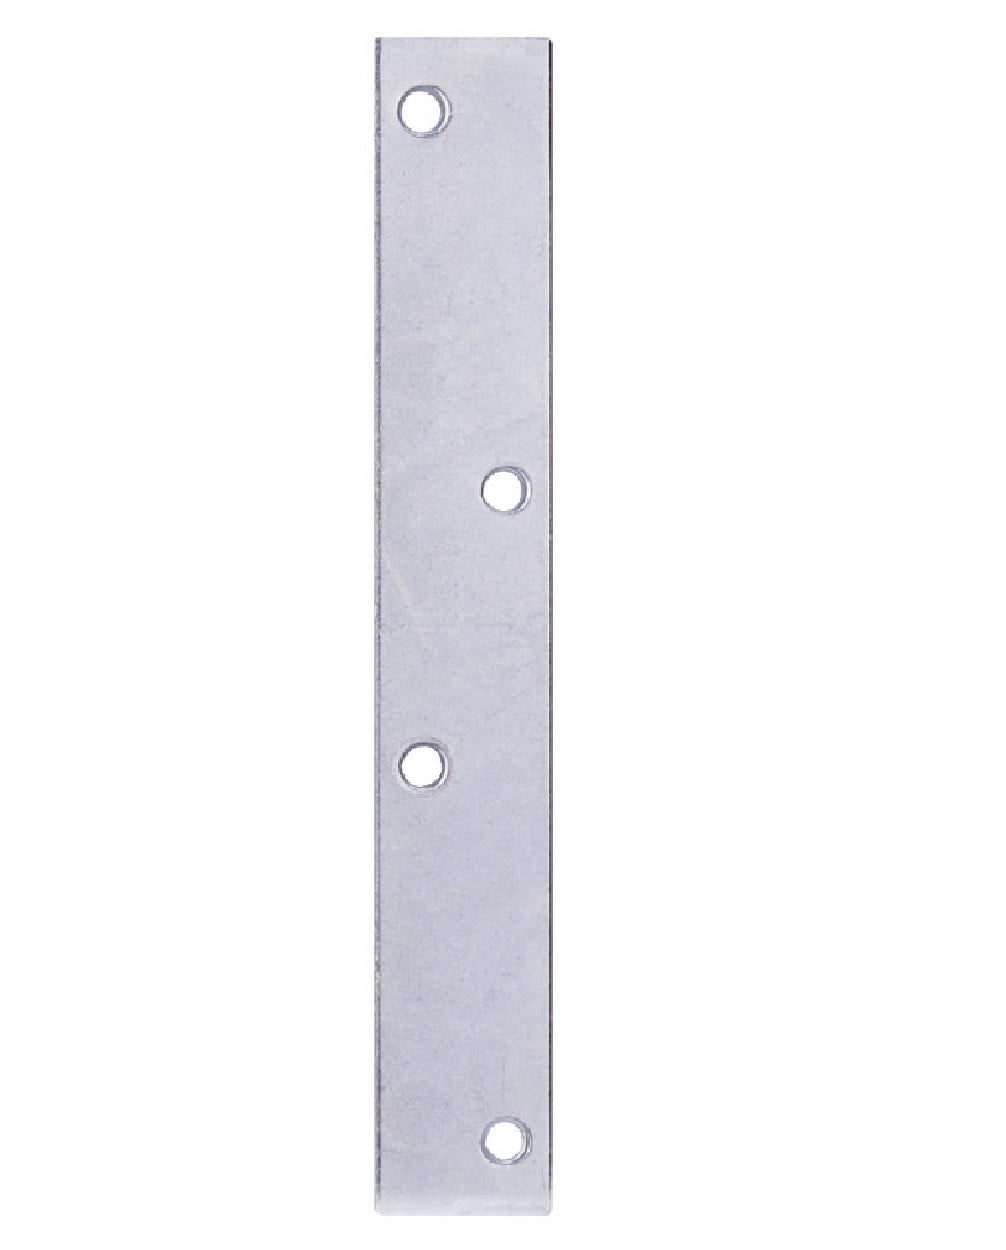 ProSource MP-Z08-013L Mending Plate, 8 Inch x 1-1/4 Inch, Zinc Plated